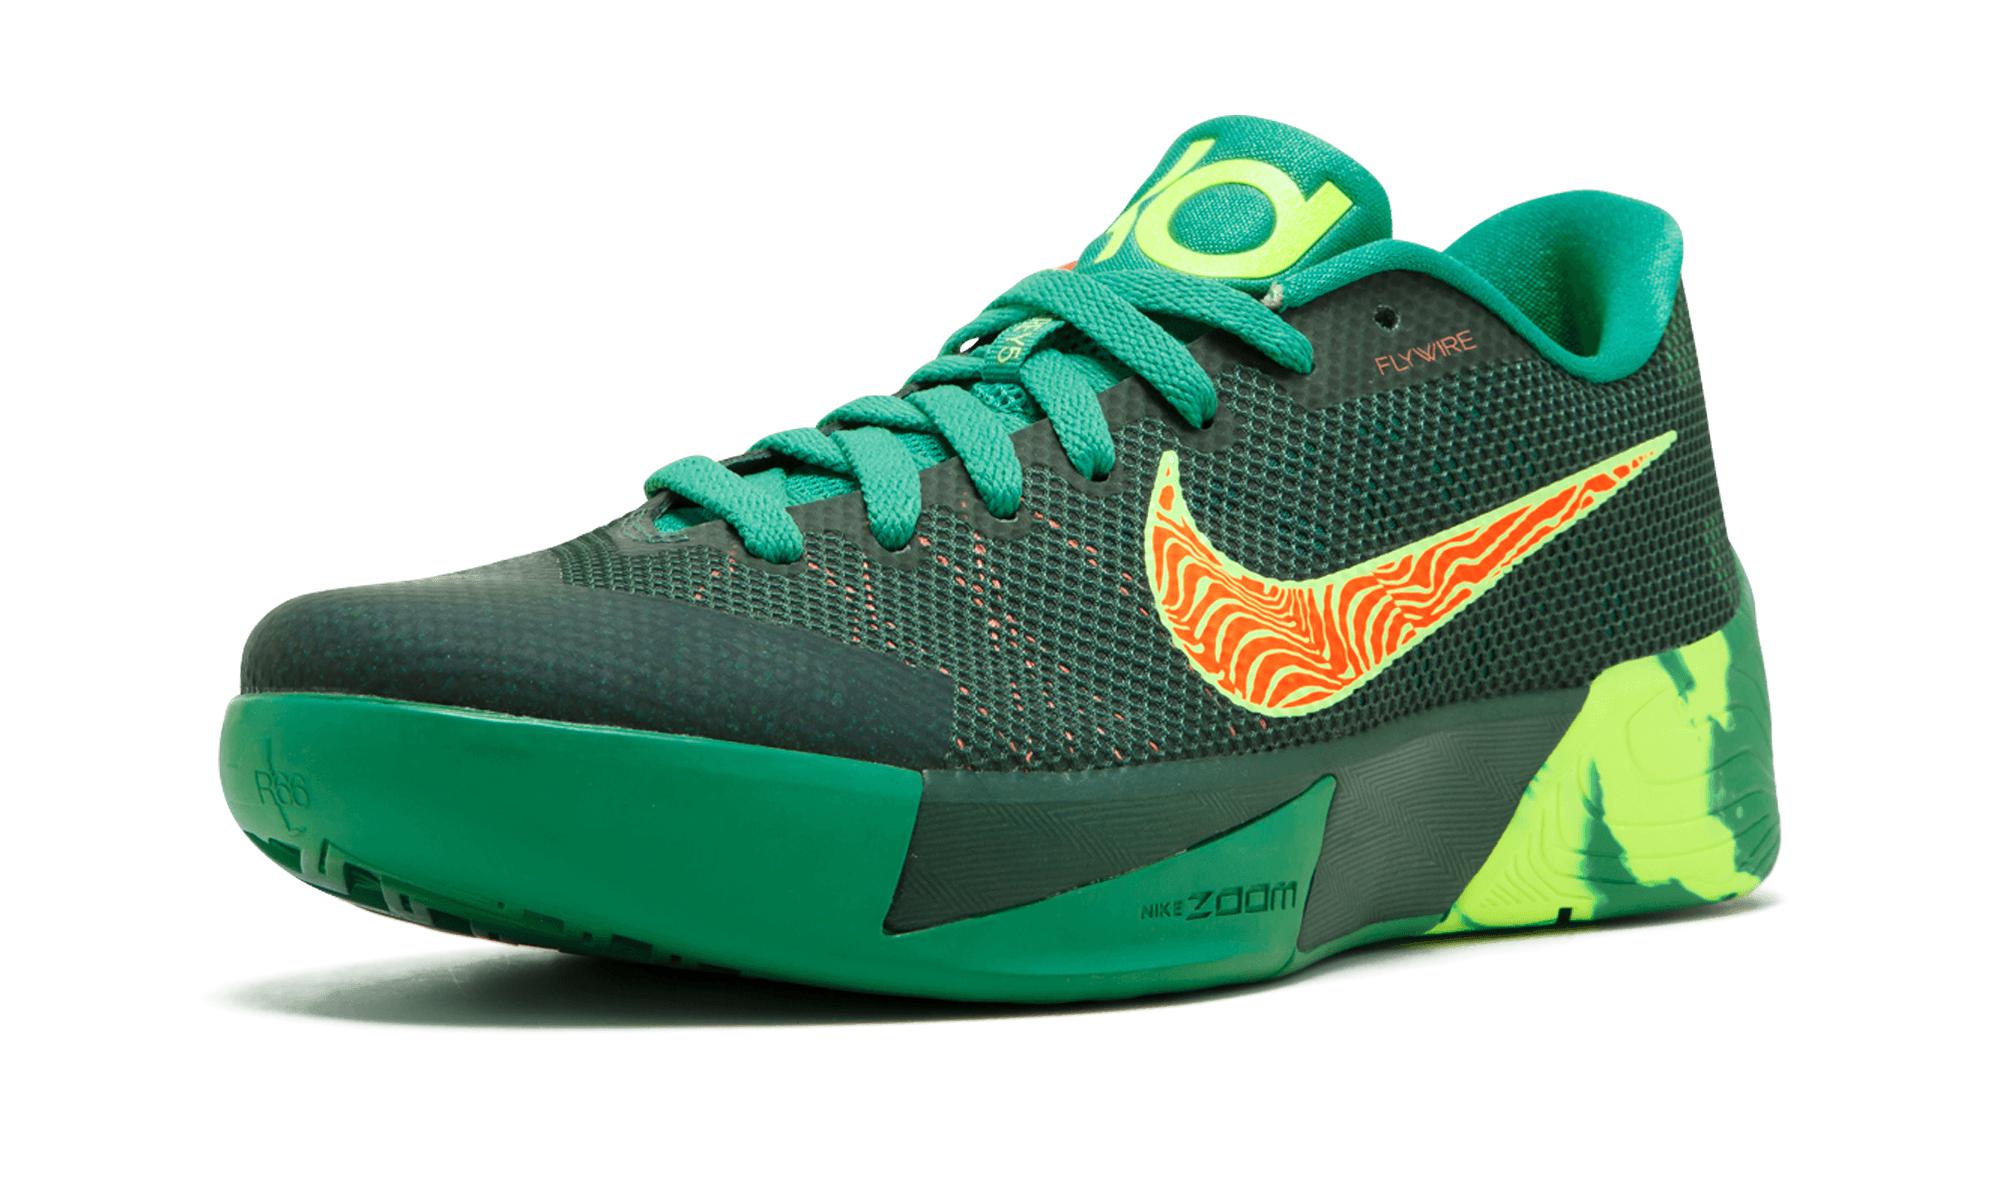 green kd shoes